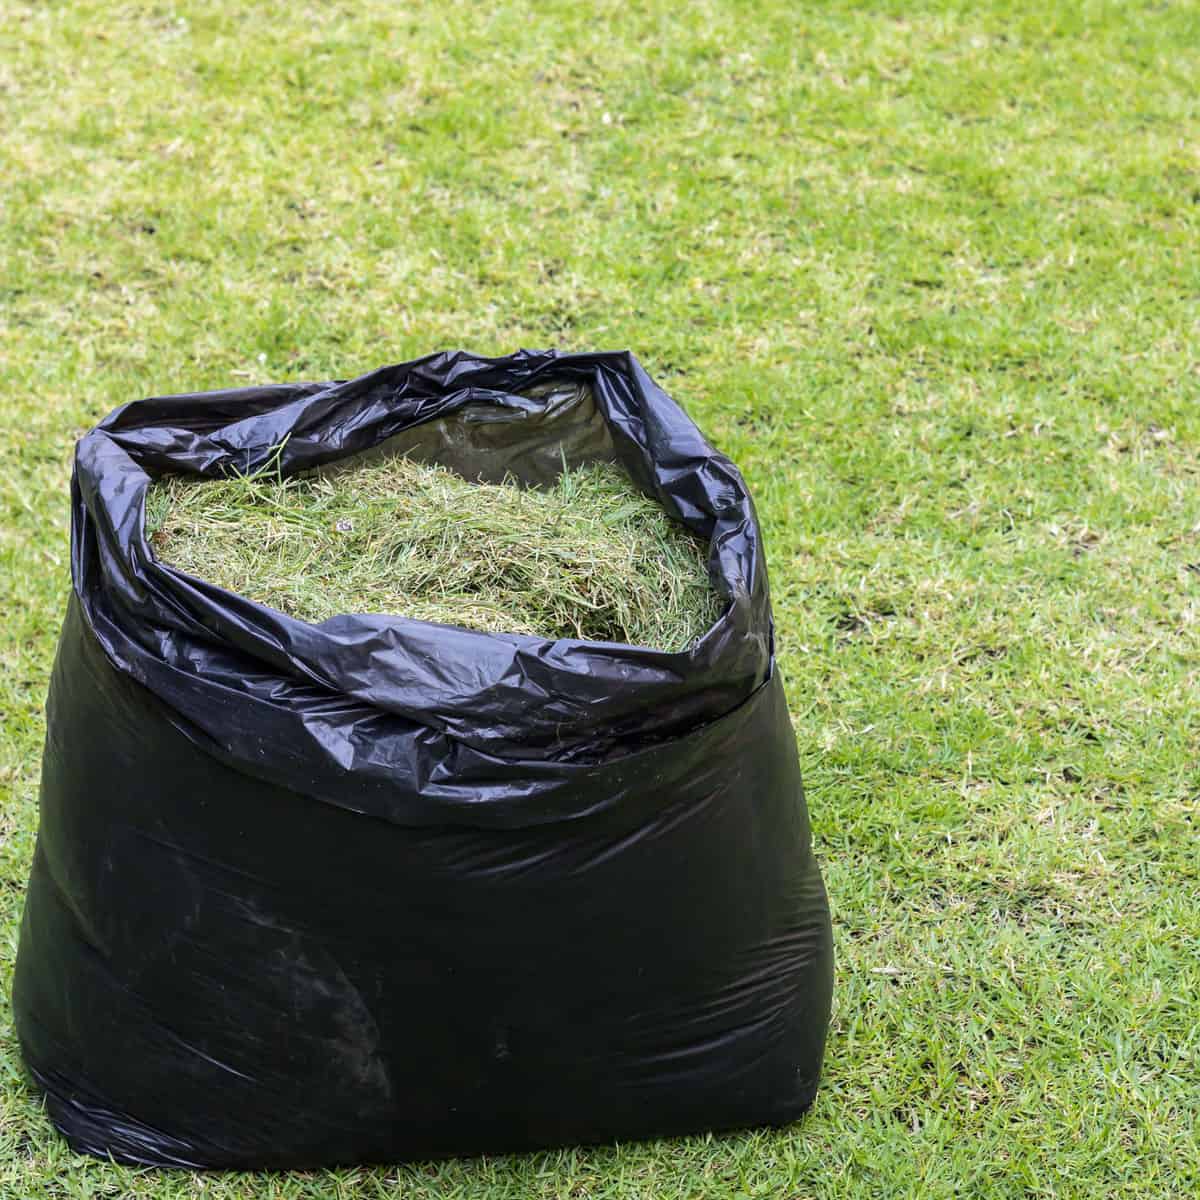 A trash bag filled with grass clippings